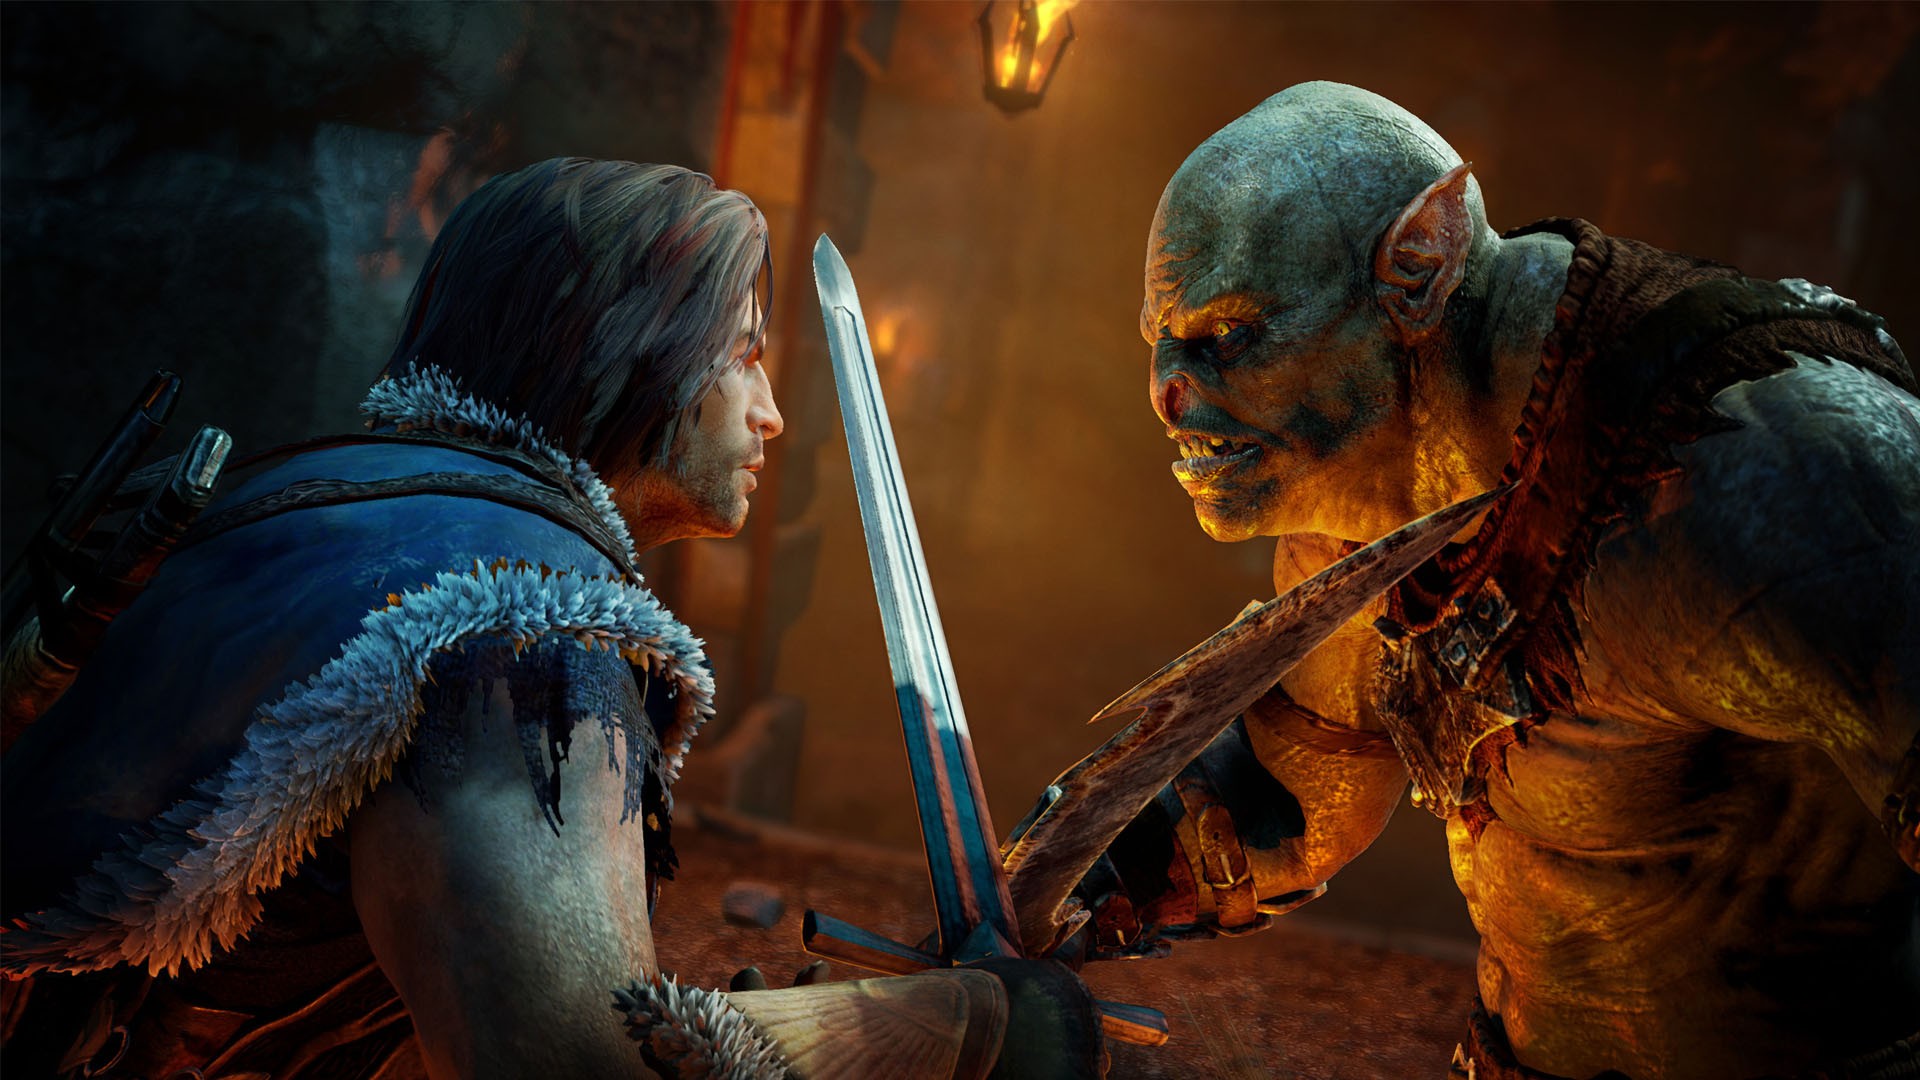 Скриншот *Middle-earth: Shadow of Mordor - Game of the Year Edition [PS4] 5.05 / 6.72 / 7.02 [EUR] (2014) [Русский] (v1.03)*